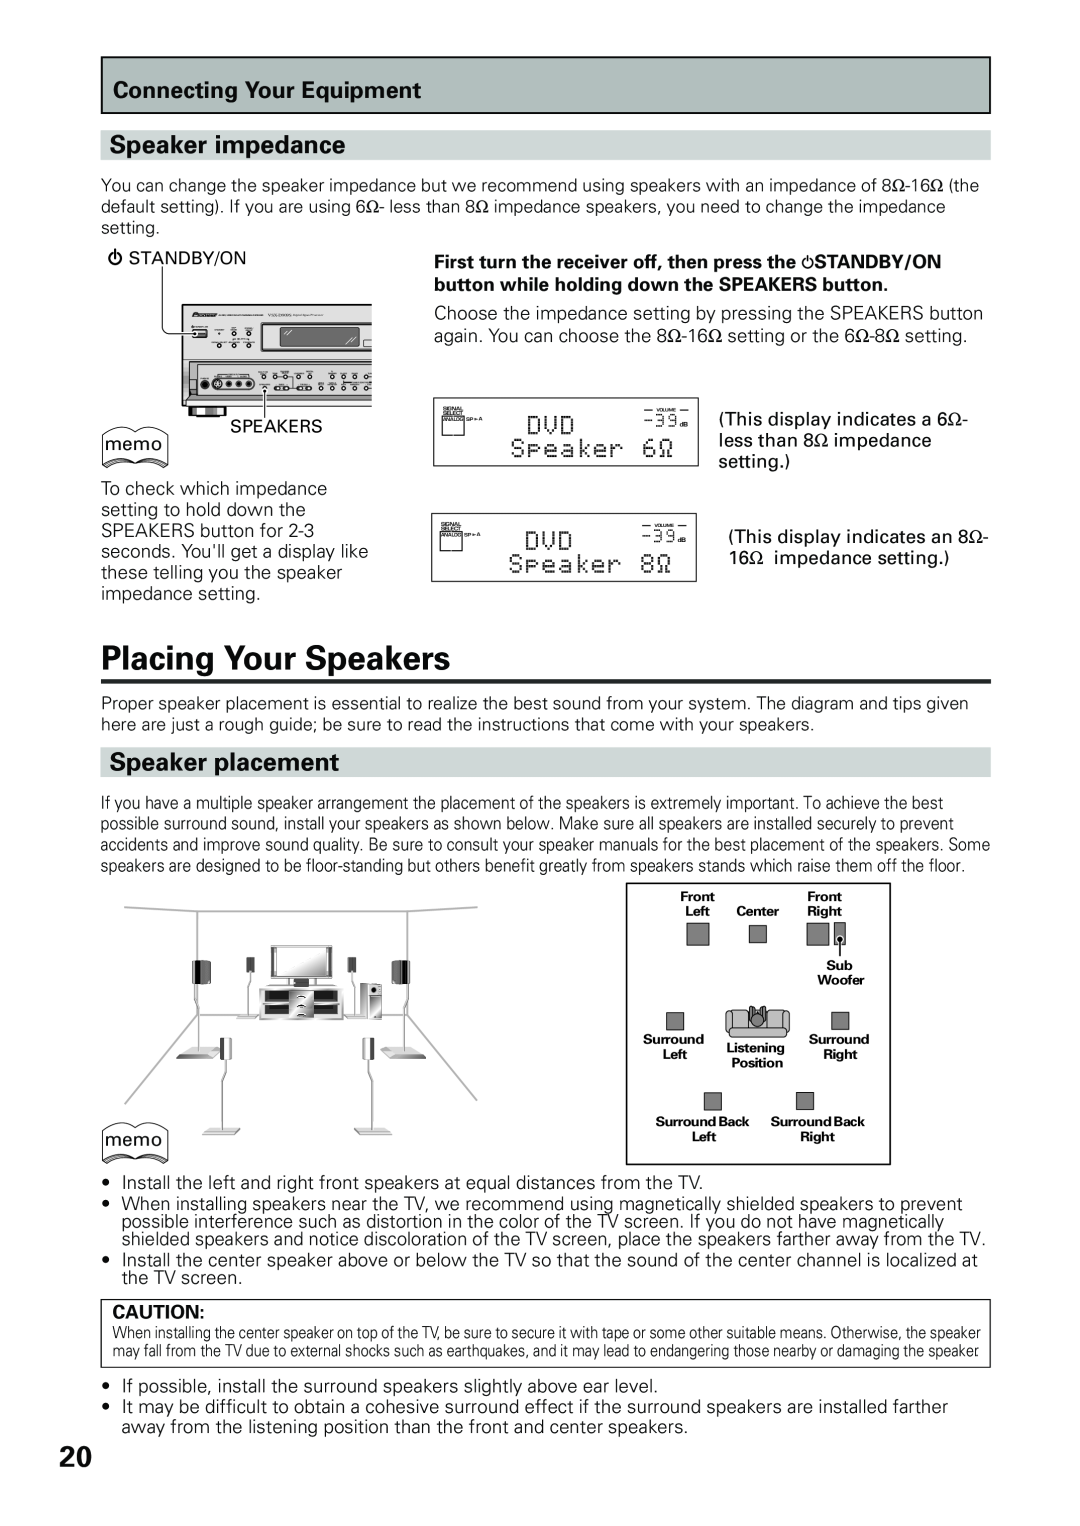 Pioneer VSX-D909S manual Placing Your Speakers, Speaker impedance, Speaker placement, Connecting Your Equipment 